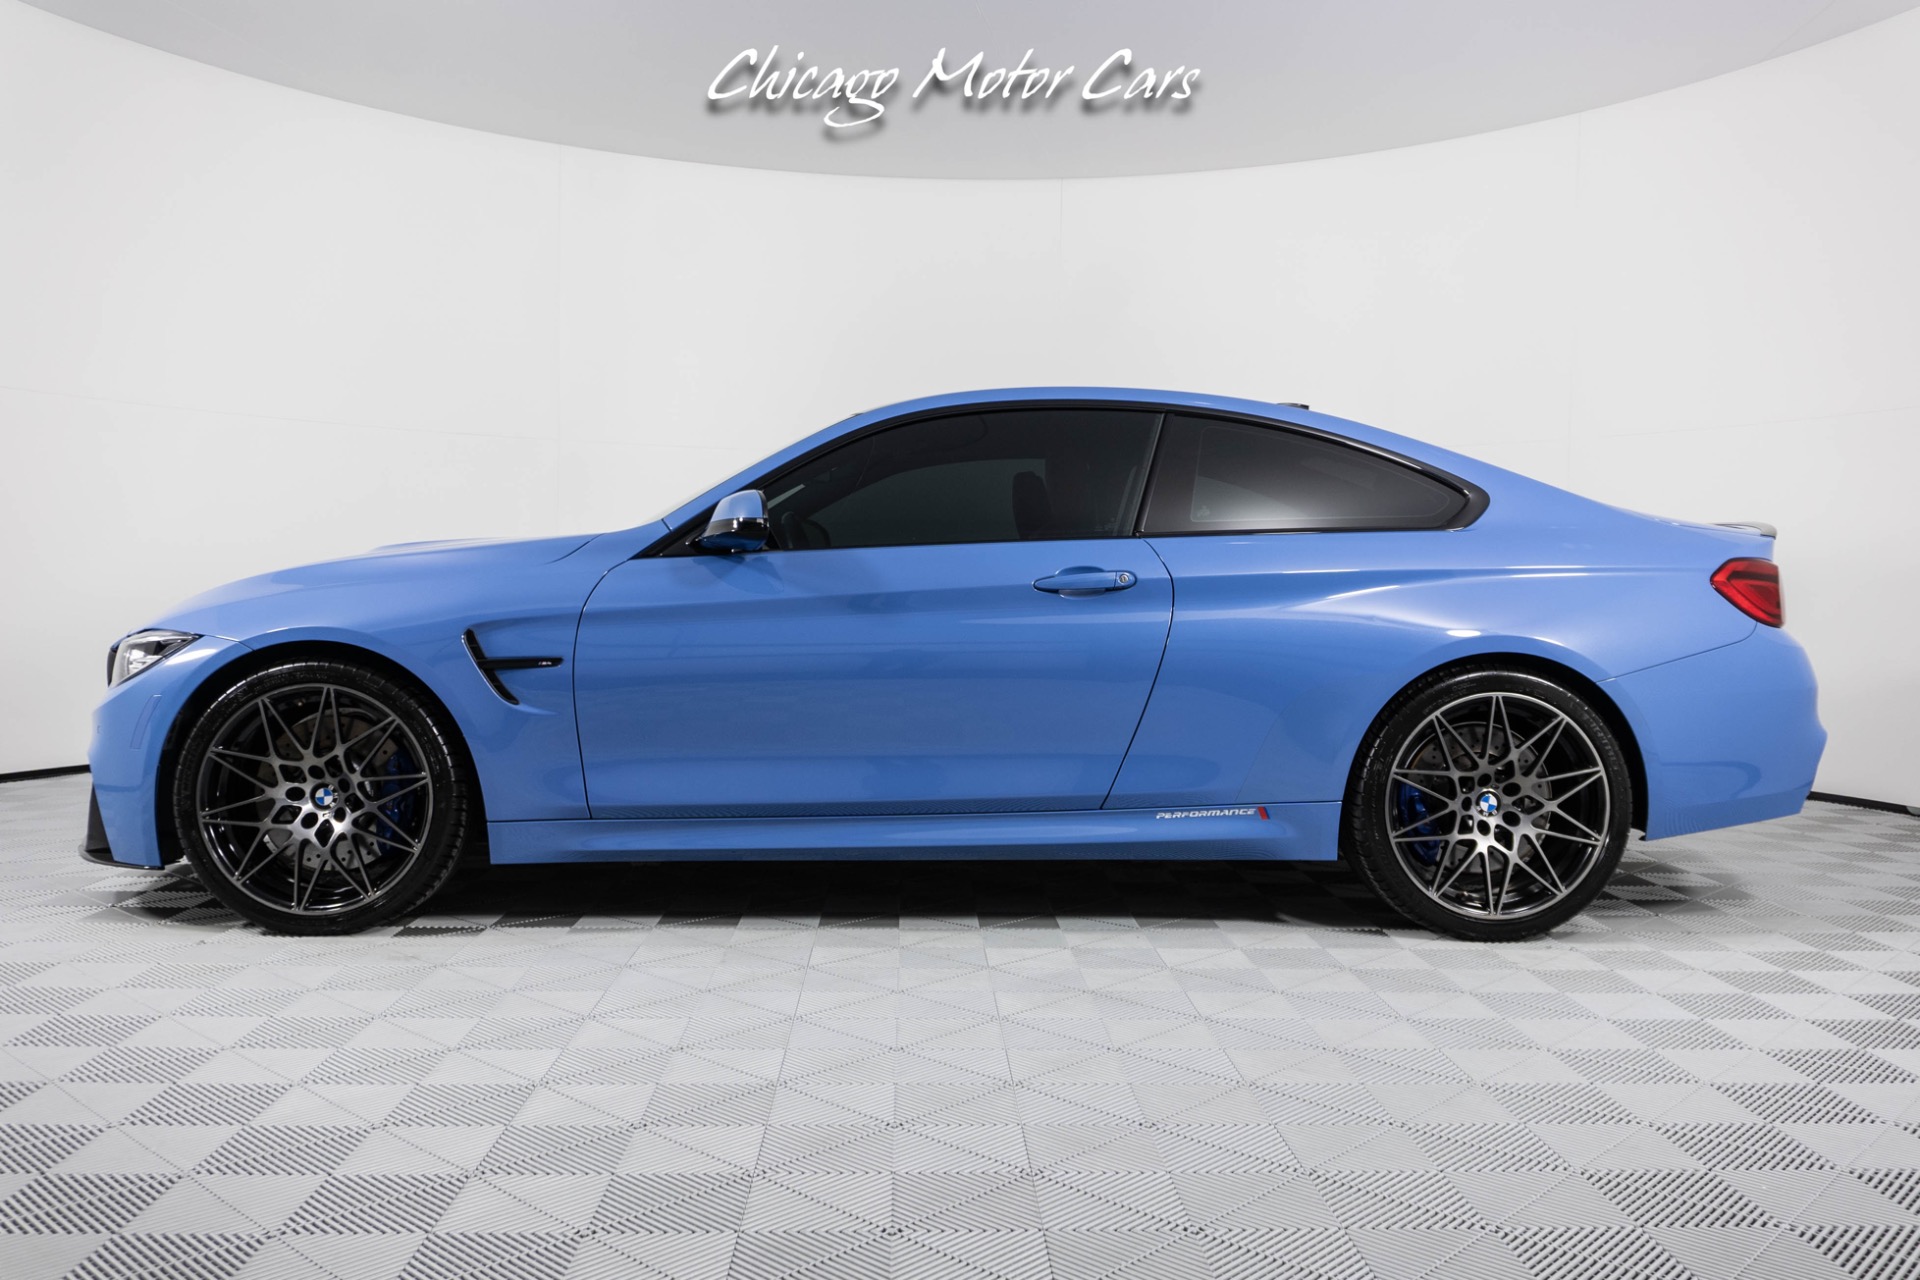 Used-2018-BMW-M4-M-COMPETITION-PACKAGE-ENGINE-UPGRADES-640hp-CARBON-FIBER--BM3-STAGE-2